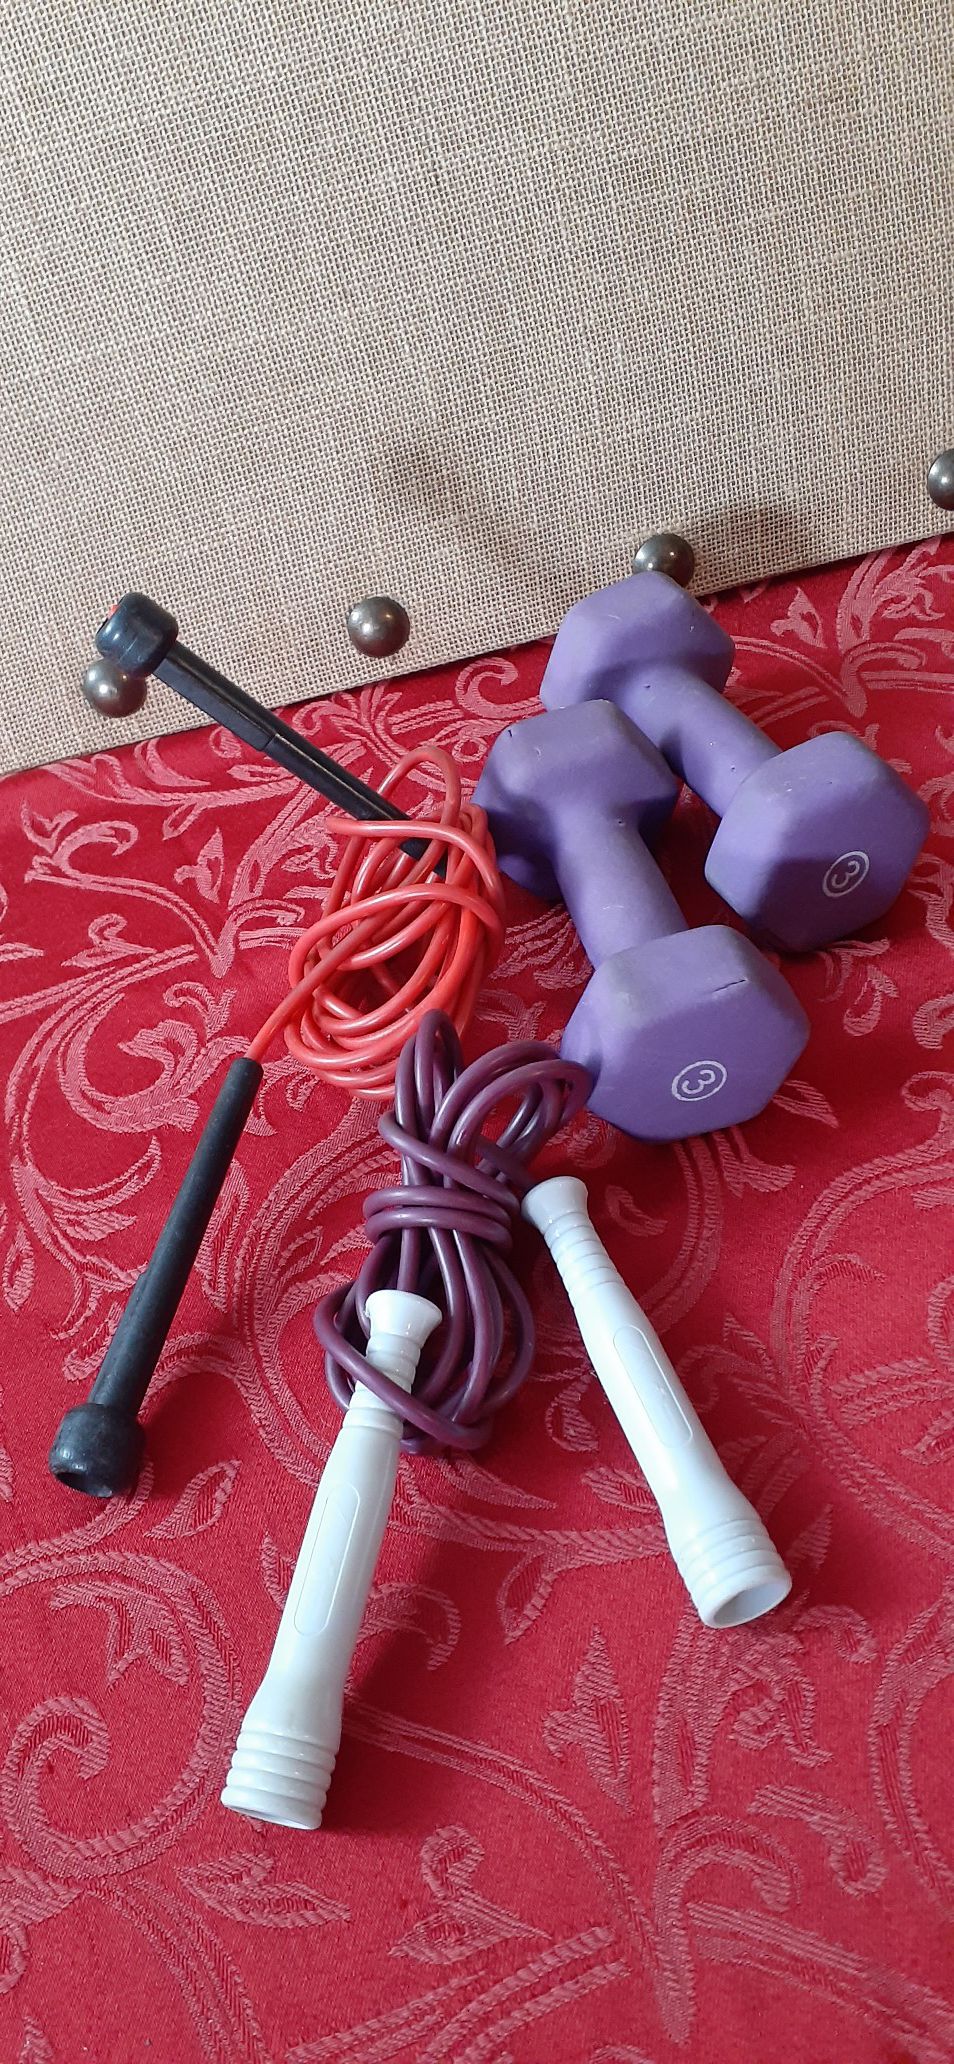 Workout Lot - # 3 lb Weights and 2 Jump Ropes